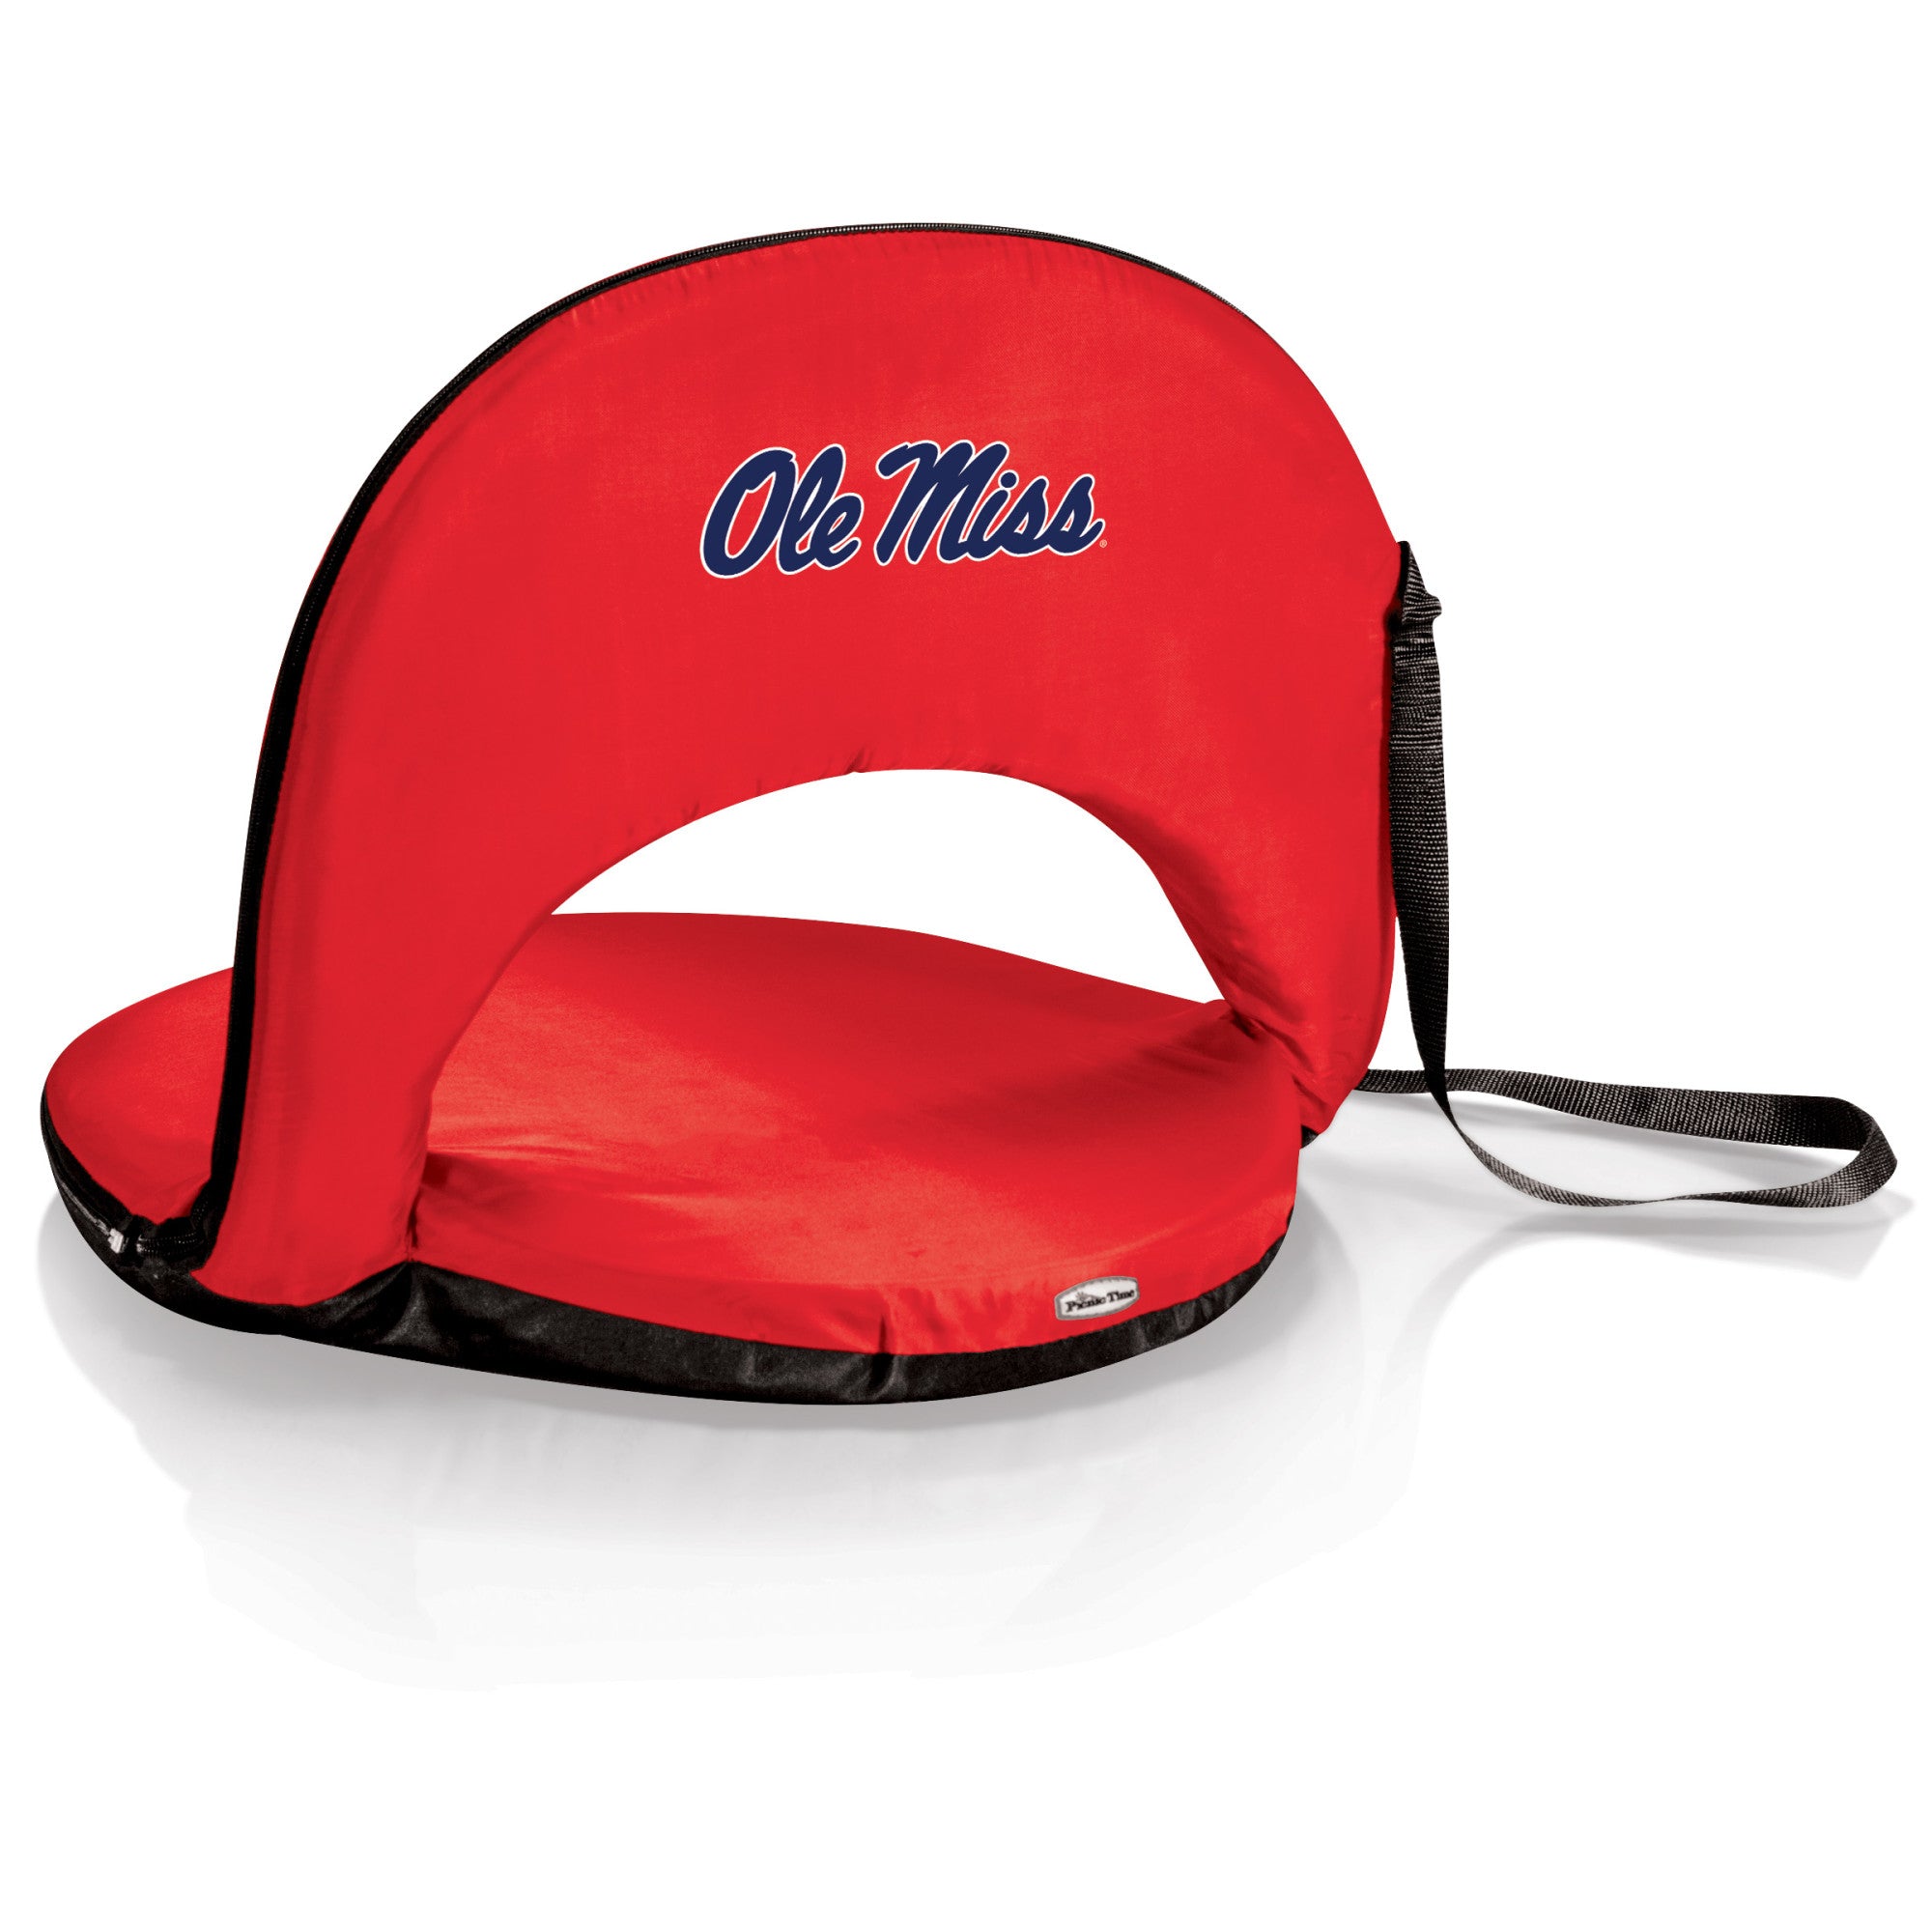 Ole Miss Rebels - Oniva Portable Reclining Seat